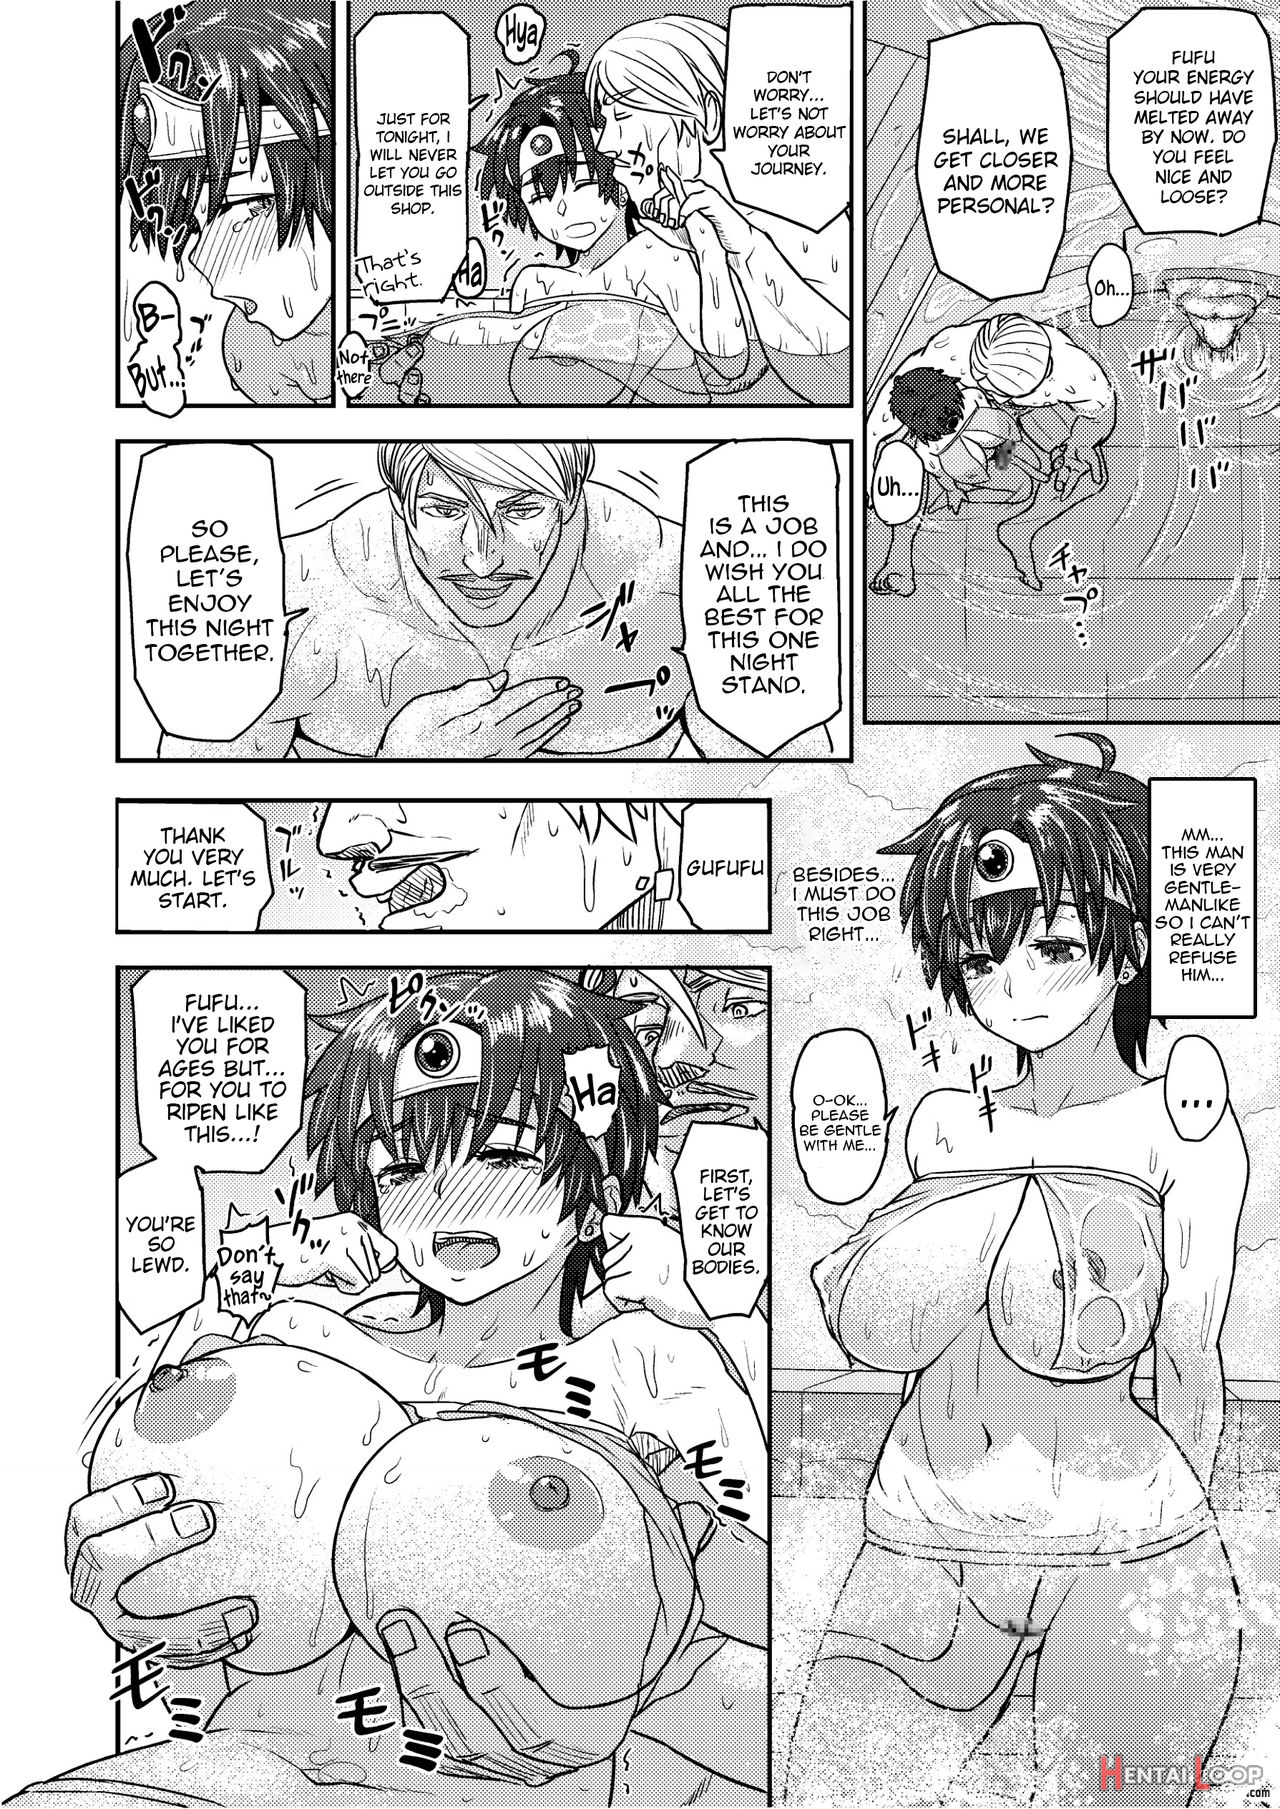 The Top Notch Newbie Soap Heroine page 8